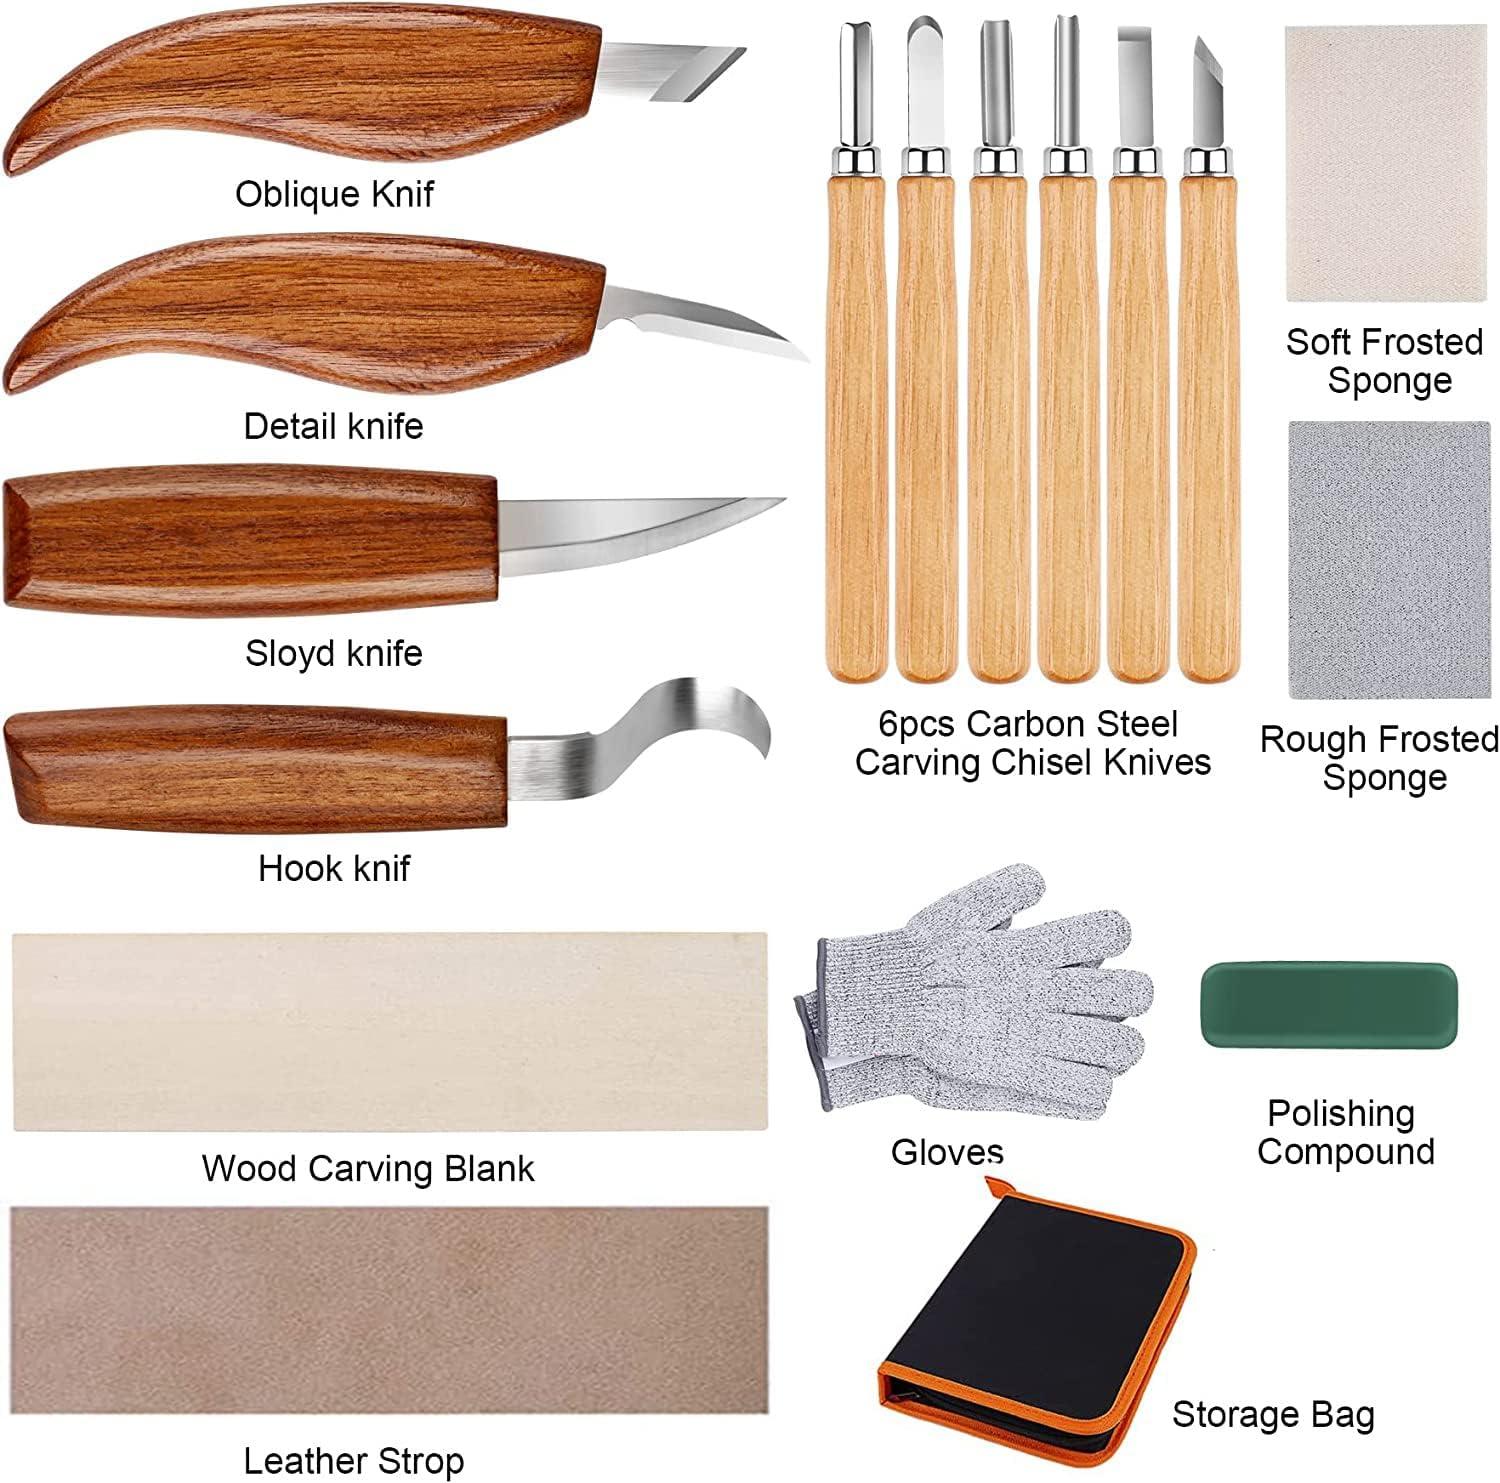 Olerqzer 26-in-1 Wood Carving Kit with Detail Wood Carving Knife